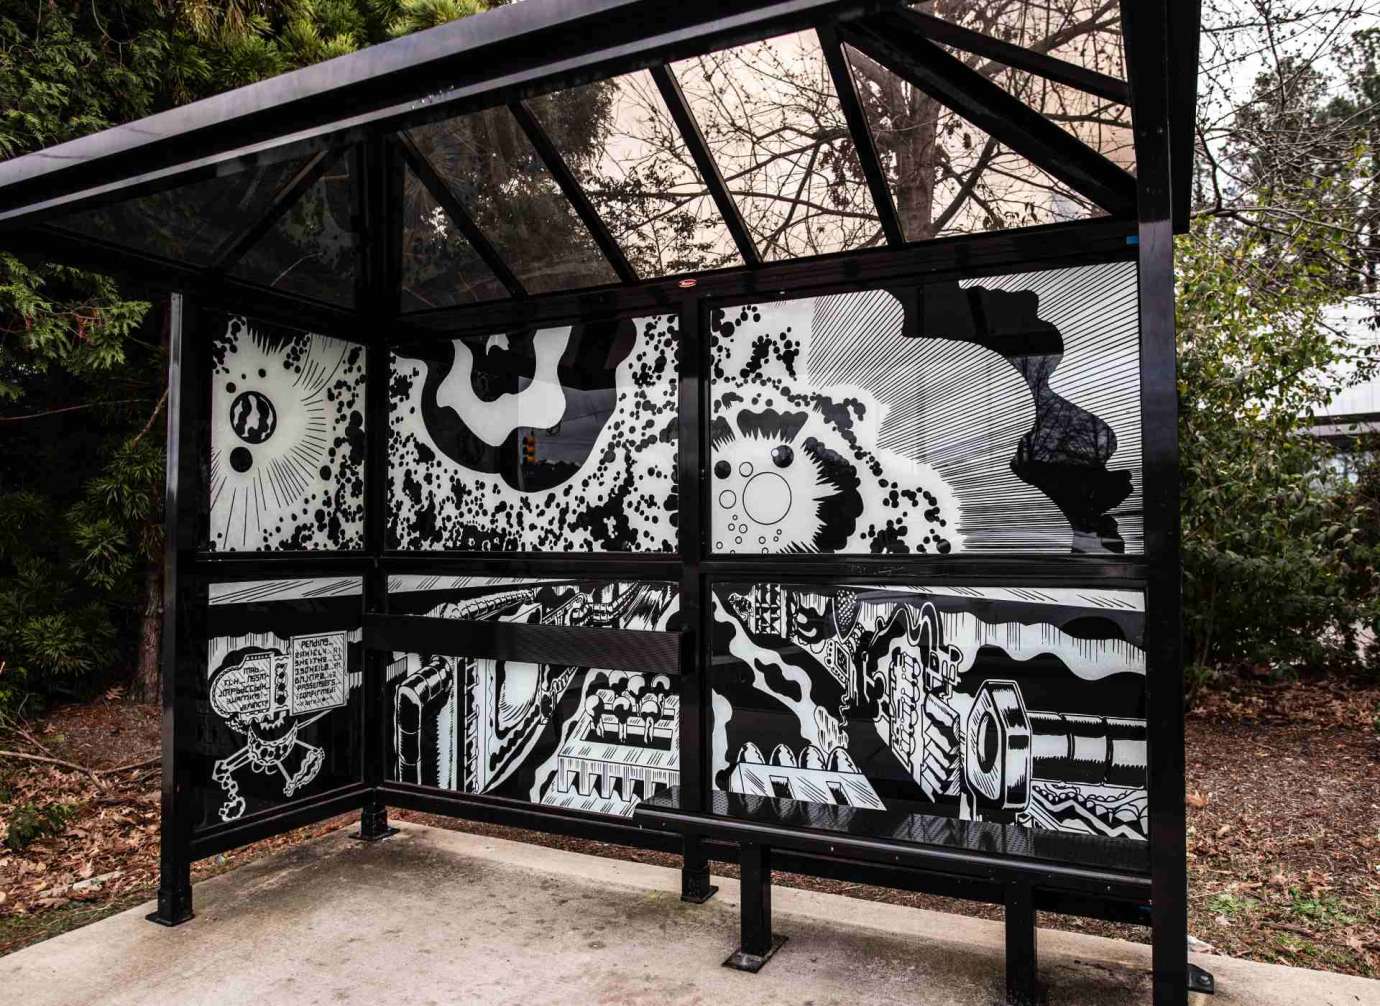 Artwork wrapped on bus shelter windows titled everyBody needs spAACe by David Moses Located at Barwell Road at Neals Creek